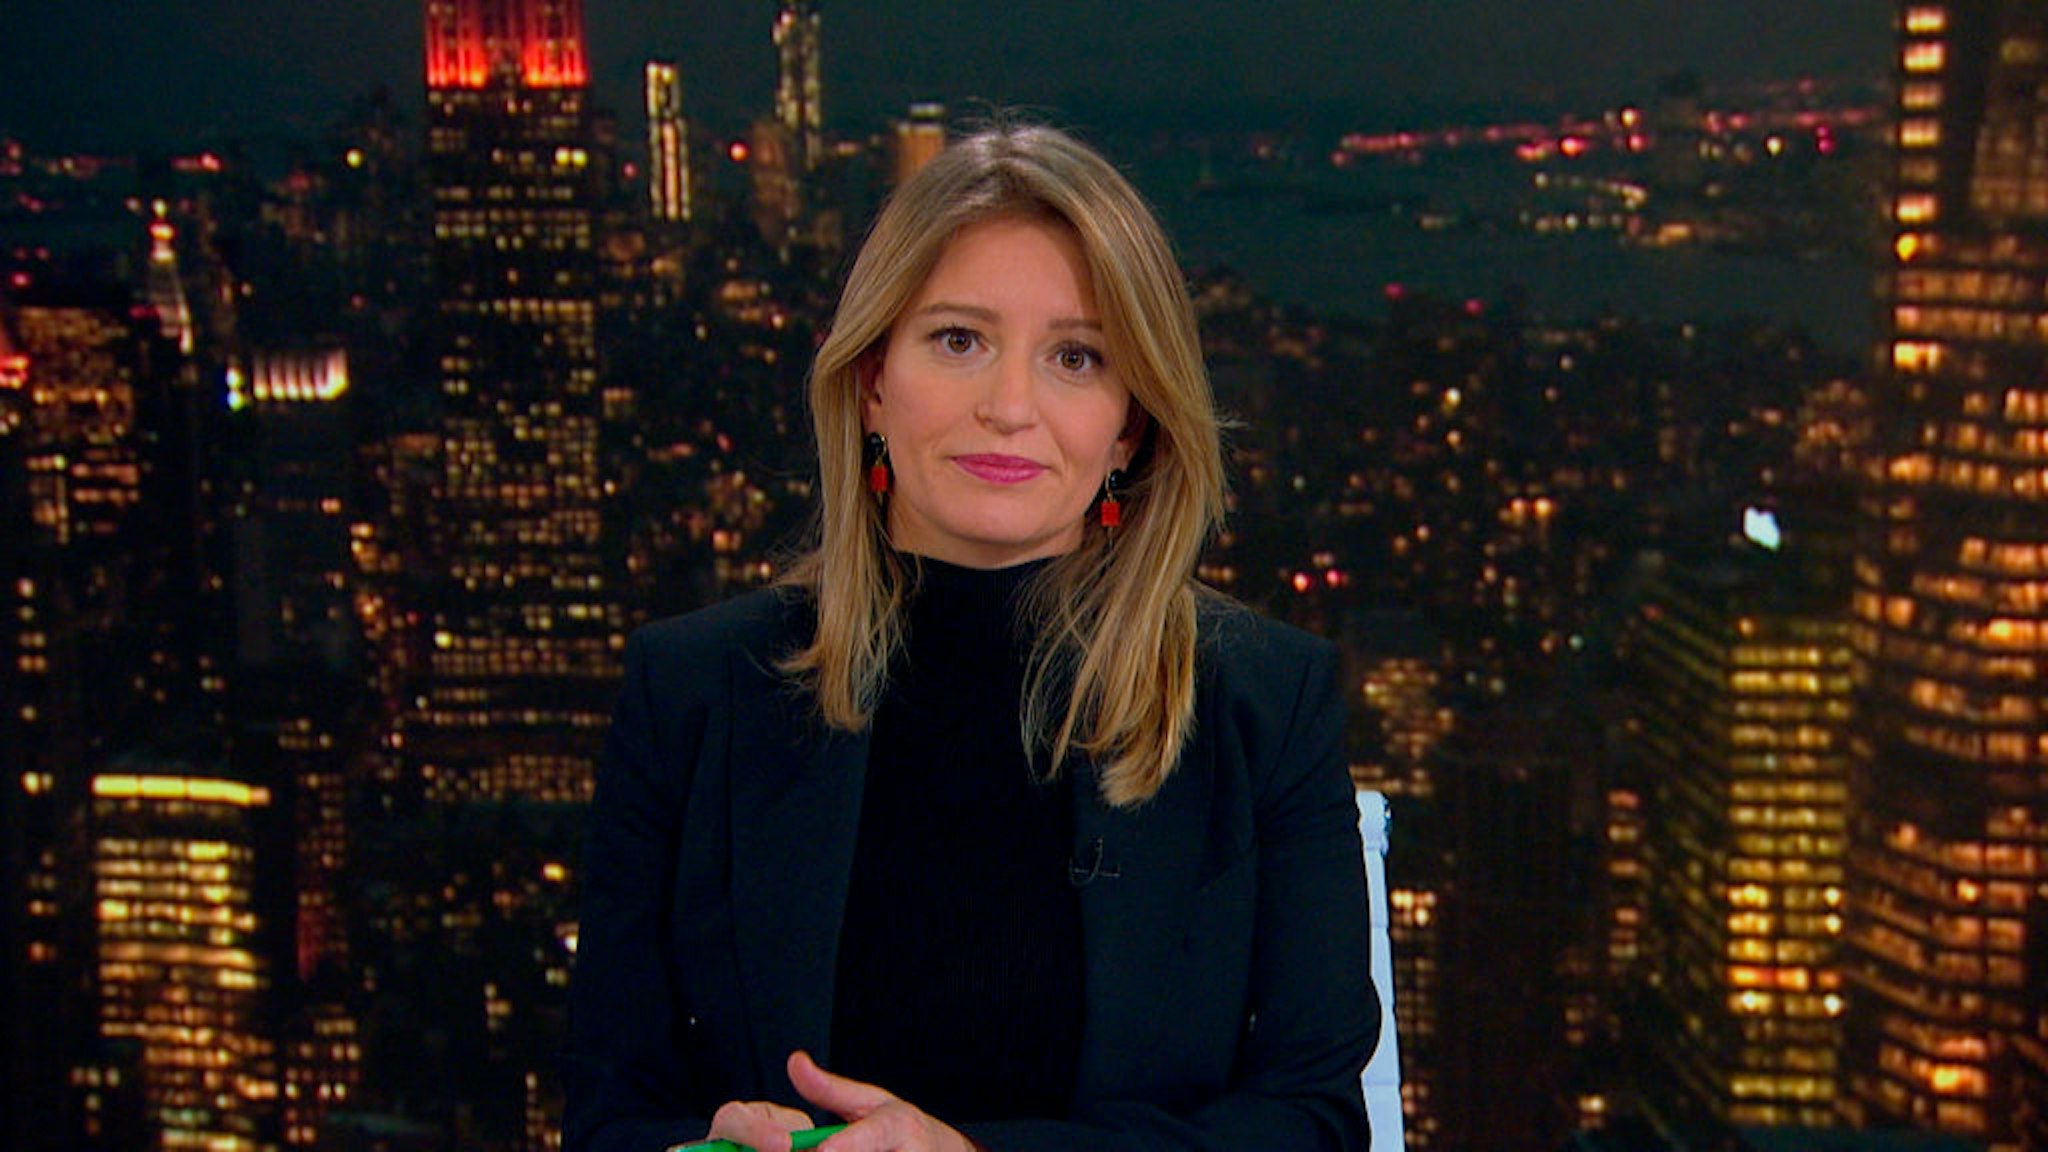 THE TONIGHT SHOW STARRING JIMMY FALLON -- Episode 1381A -- Pictured in this screengrab: MSNBC Anchor Katy Tur during an interview on January 6, 2021 -- (Photo By: NBC/NBCU Photo Bank via Getty Images)